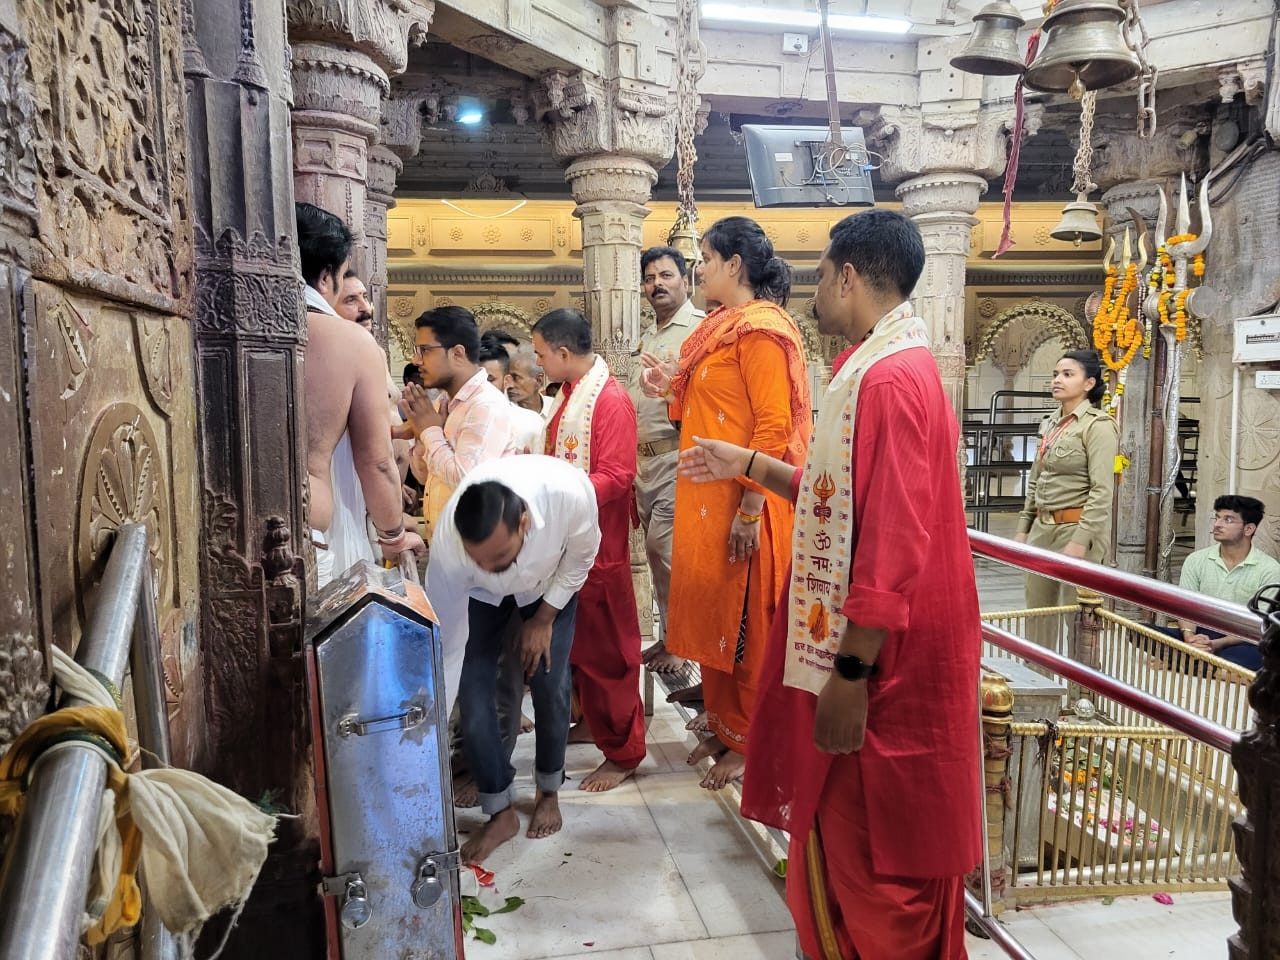 cops in priest attire at kashi temple, akhilesh yadav asks 'who gave orders?'